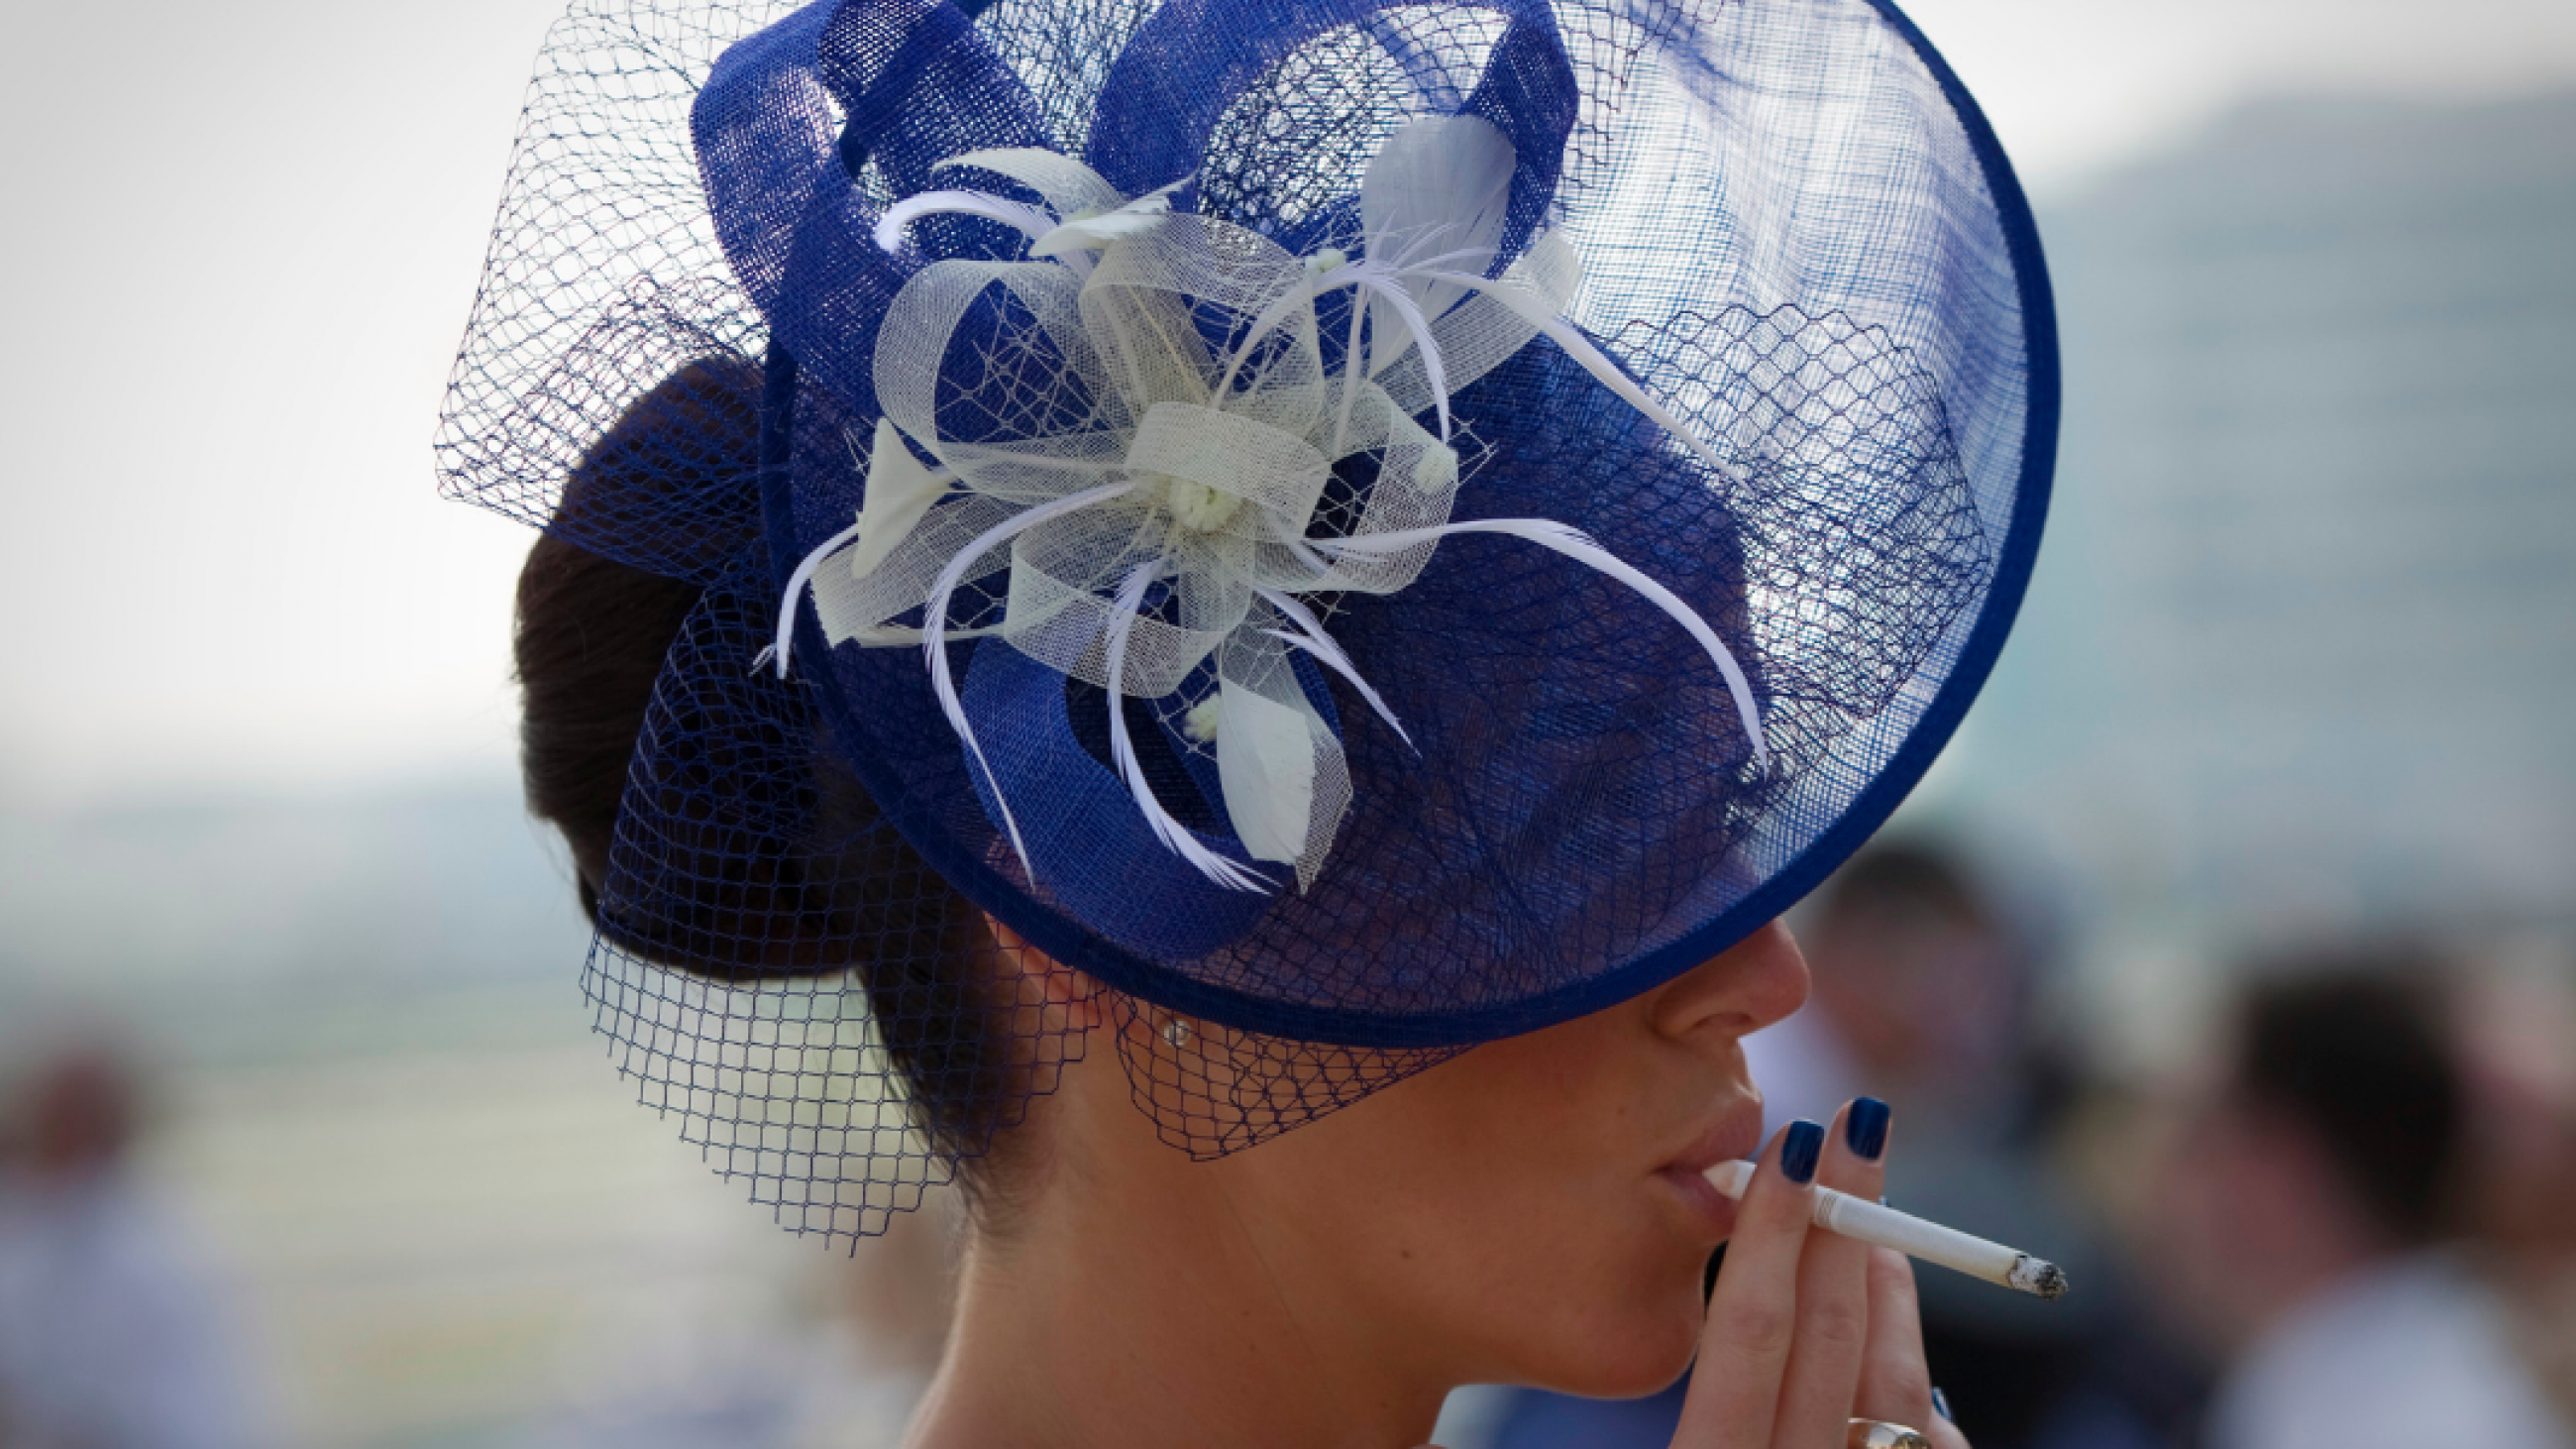 A spectator smokes a cigarette as she waits for the start of the Dubai World Cup horse race at Meydan Racecourse in Dubai, United Arab Emirates on March 29, 2014